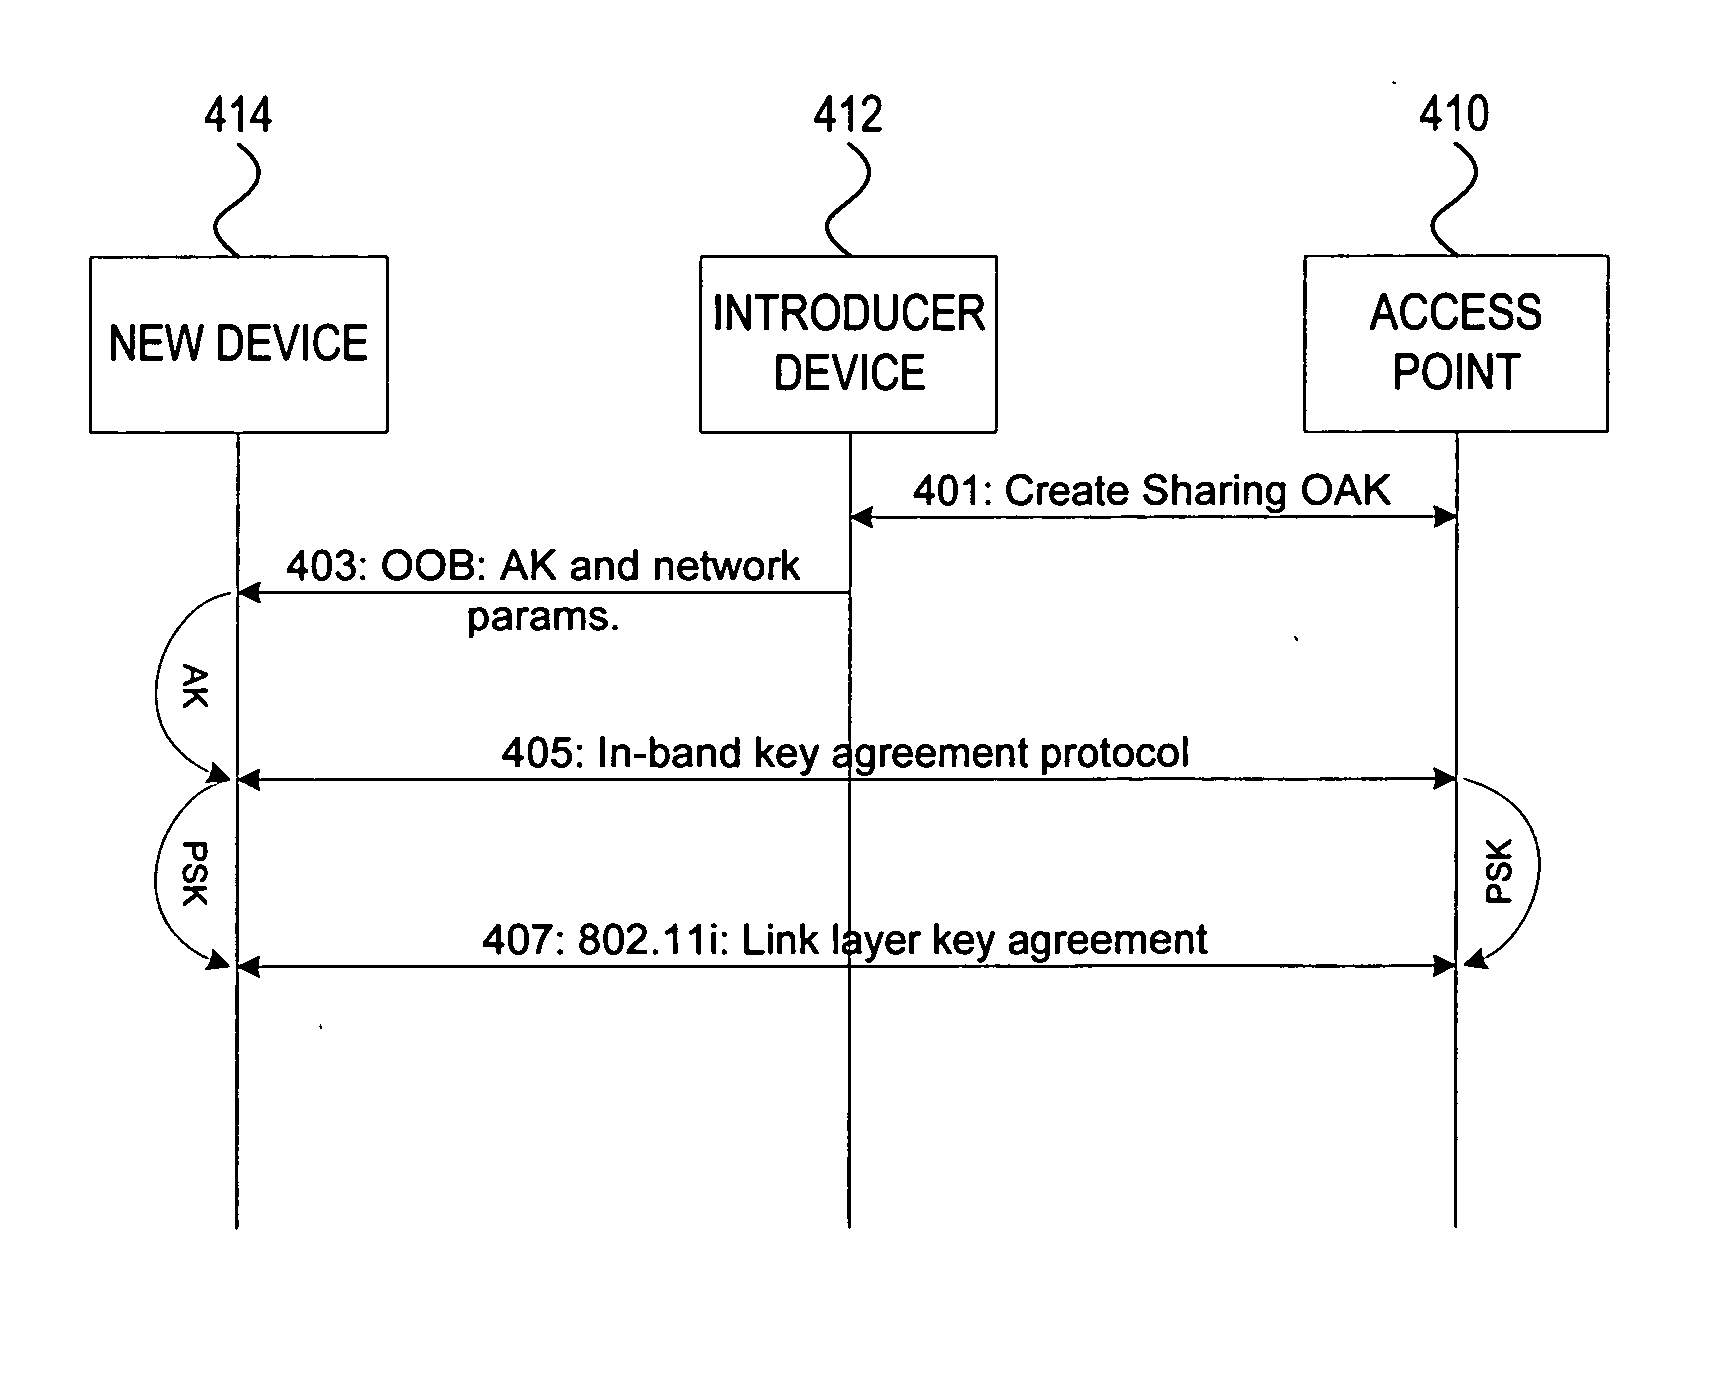 Administration of wireless local area networks